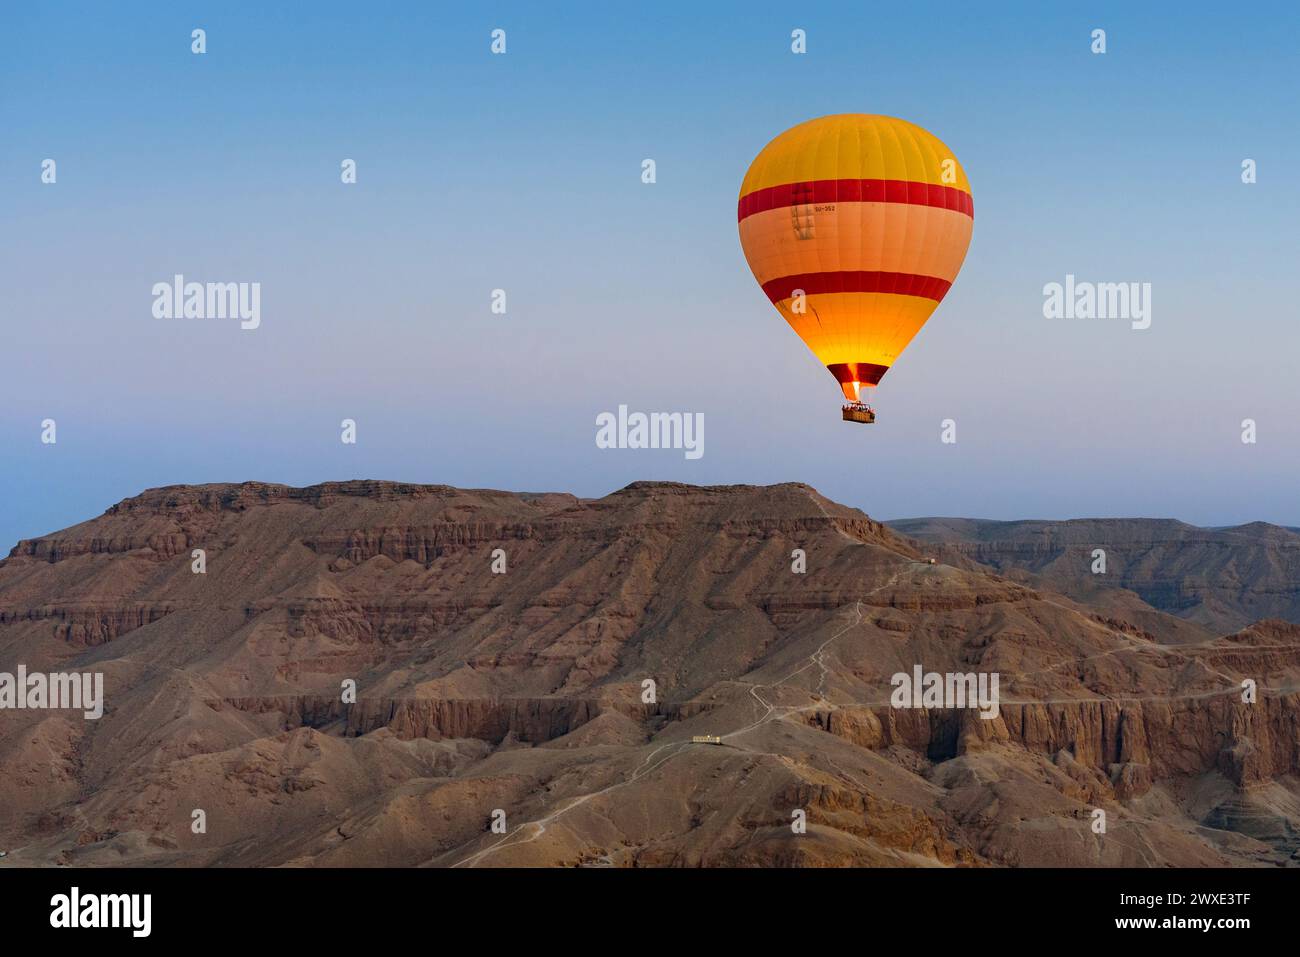 A sunrise balloon ride over the Valley of the Kings, Luxor, Egypt. Stock Photo